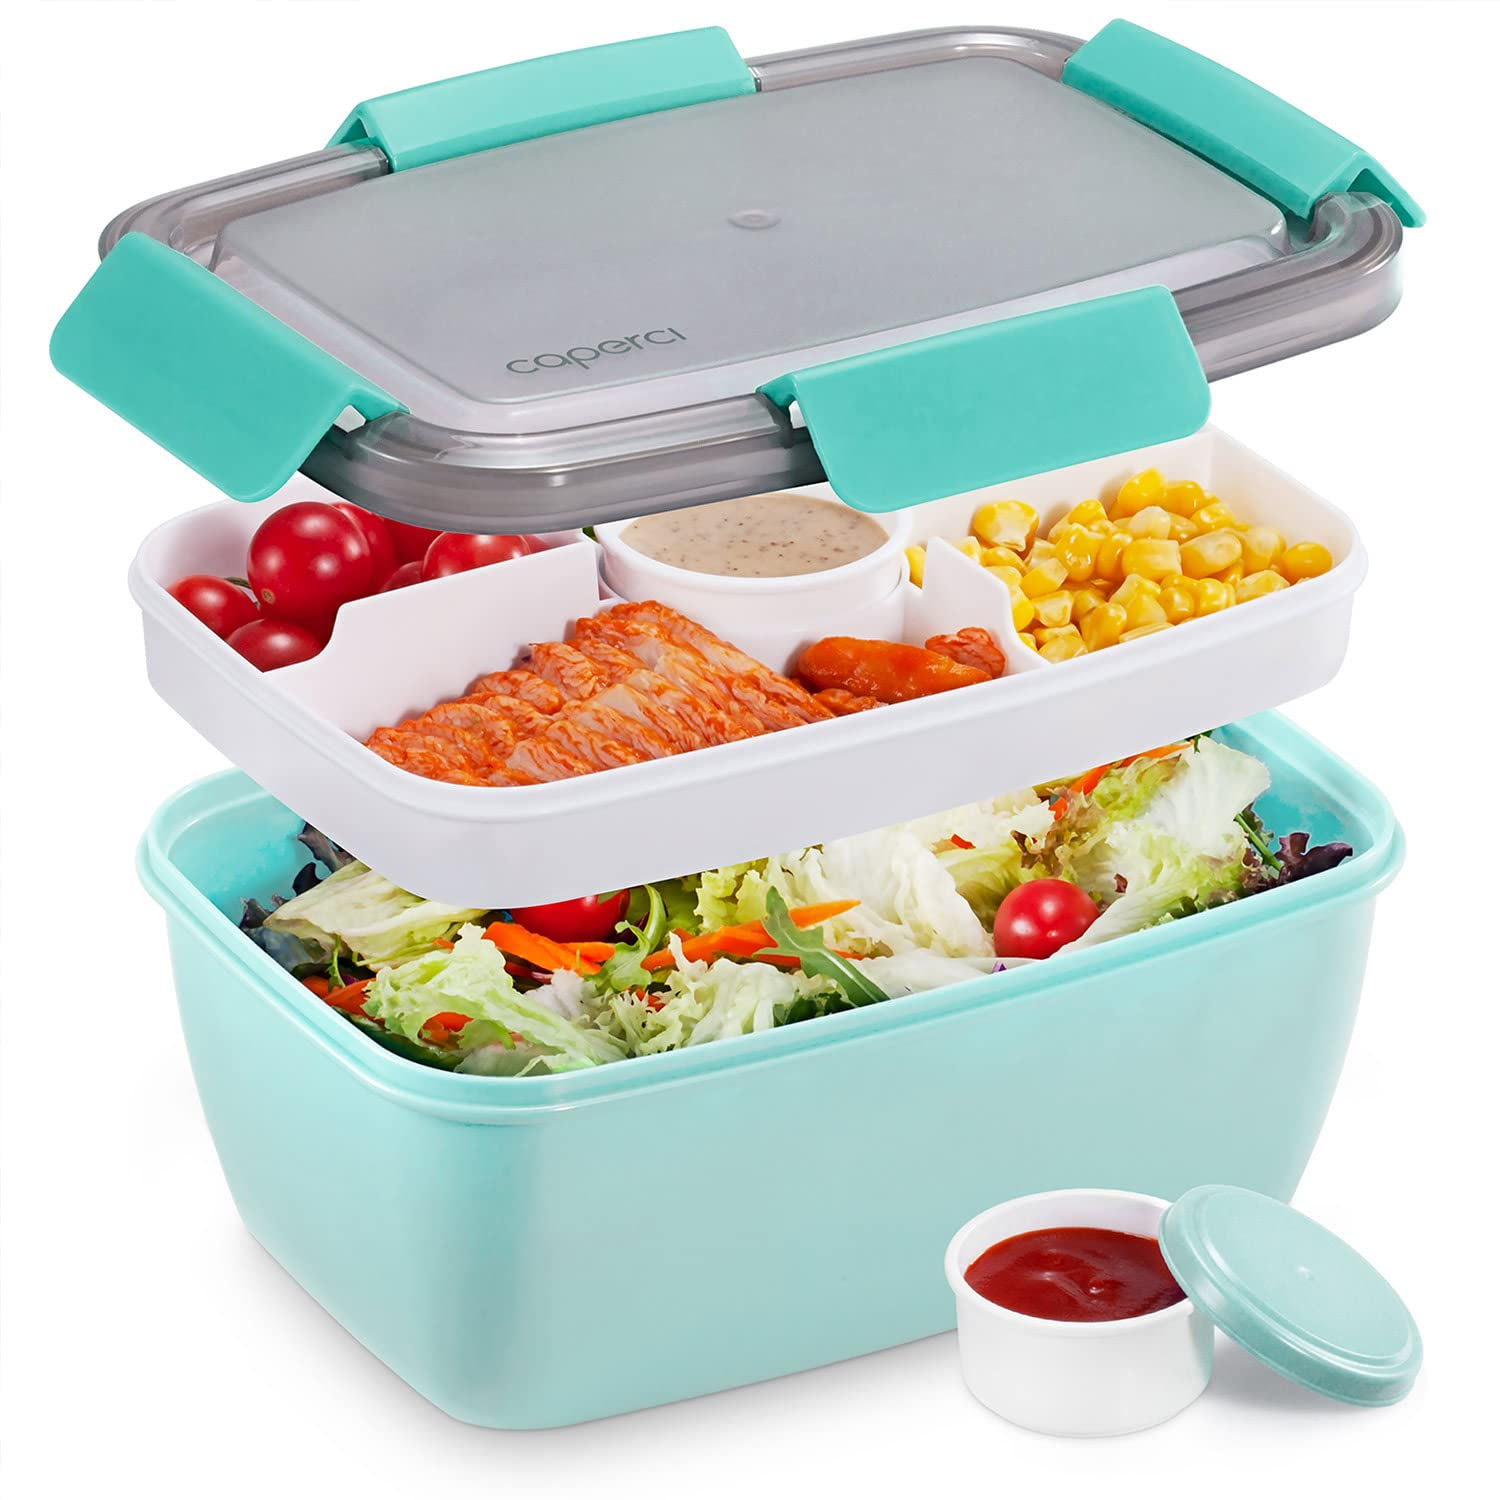 Caperci Large Salad Container Bowl for Lunch